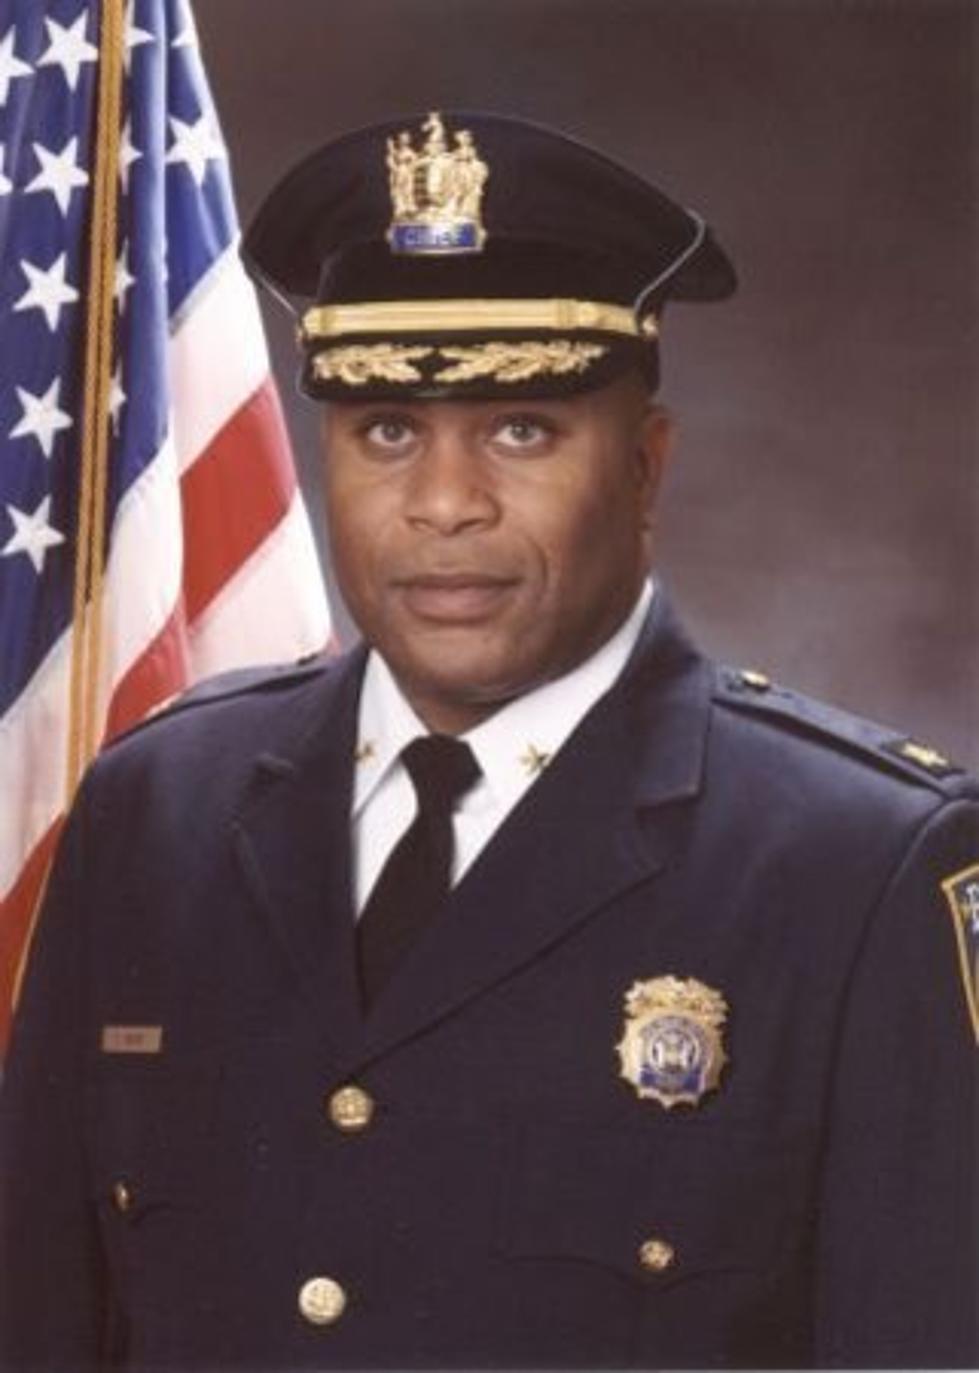 Cranford Police Chief Utters Racial Comment – Fit or Not Fit to Serve [POLL]